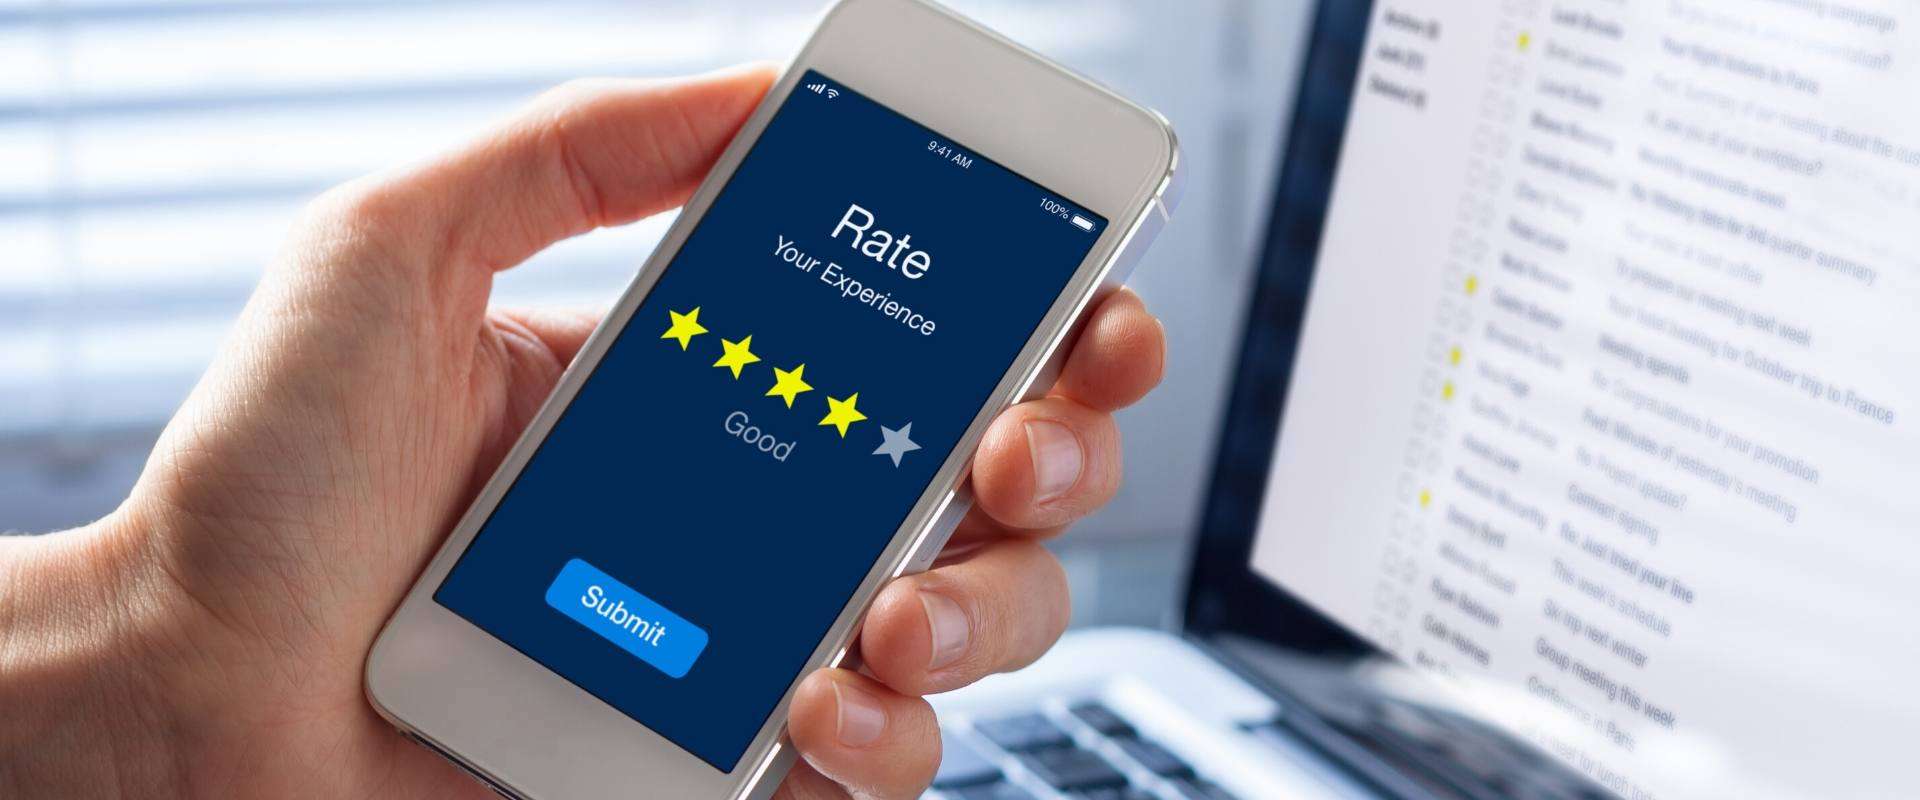 Why You Should Care About Customer Reviews